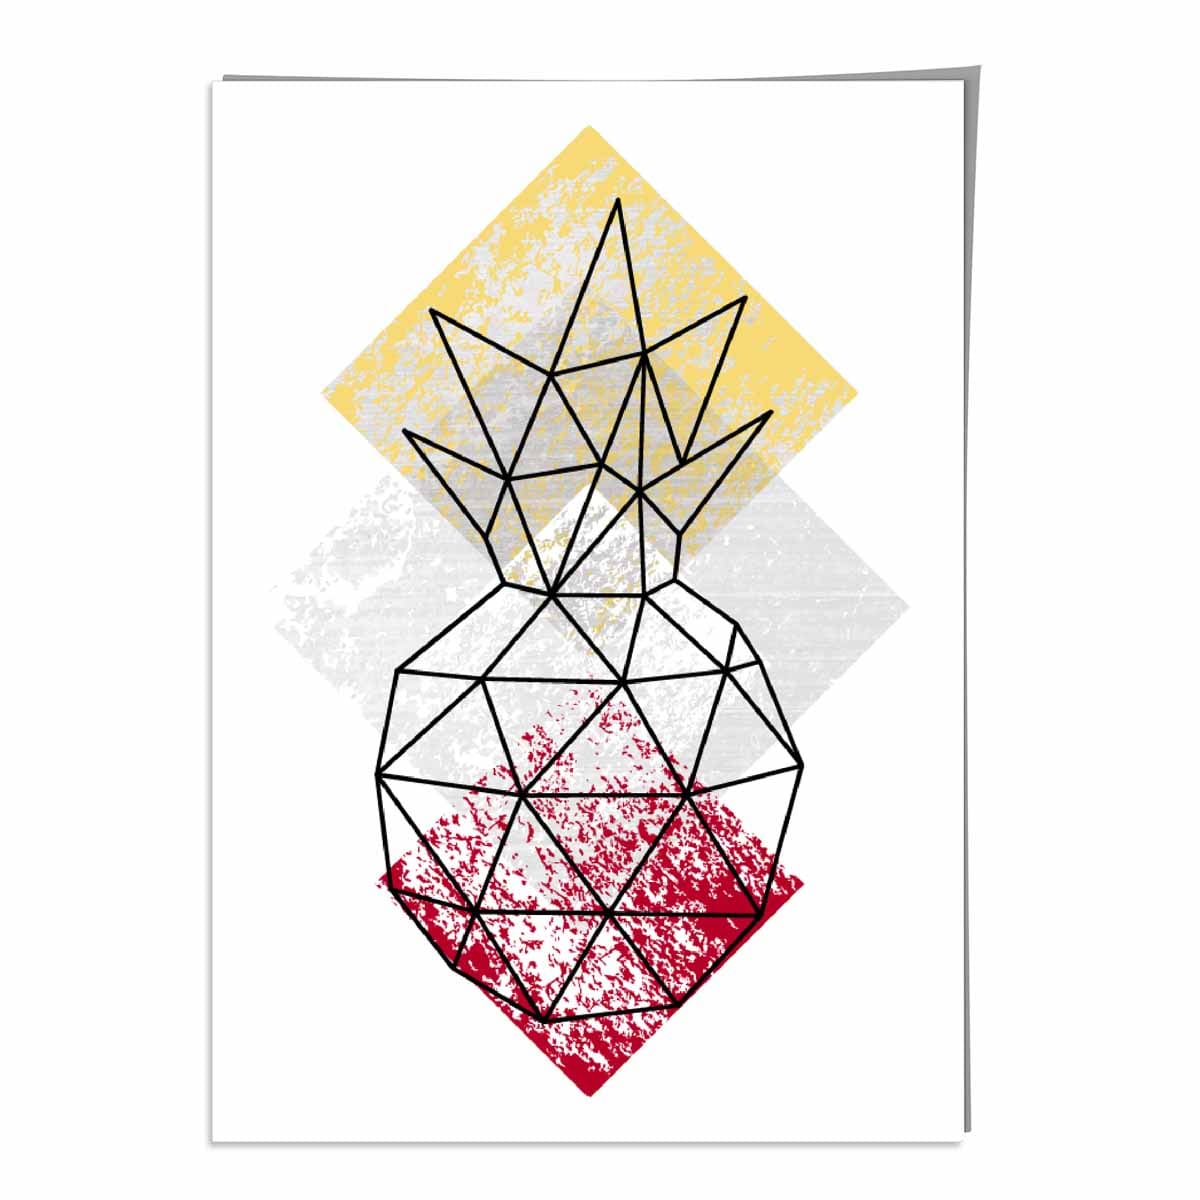 Geometric Fruit Line art Poster of Pineapple Textured Yellow Grey Red